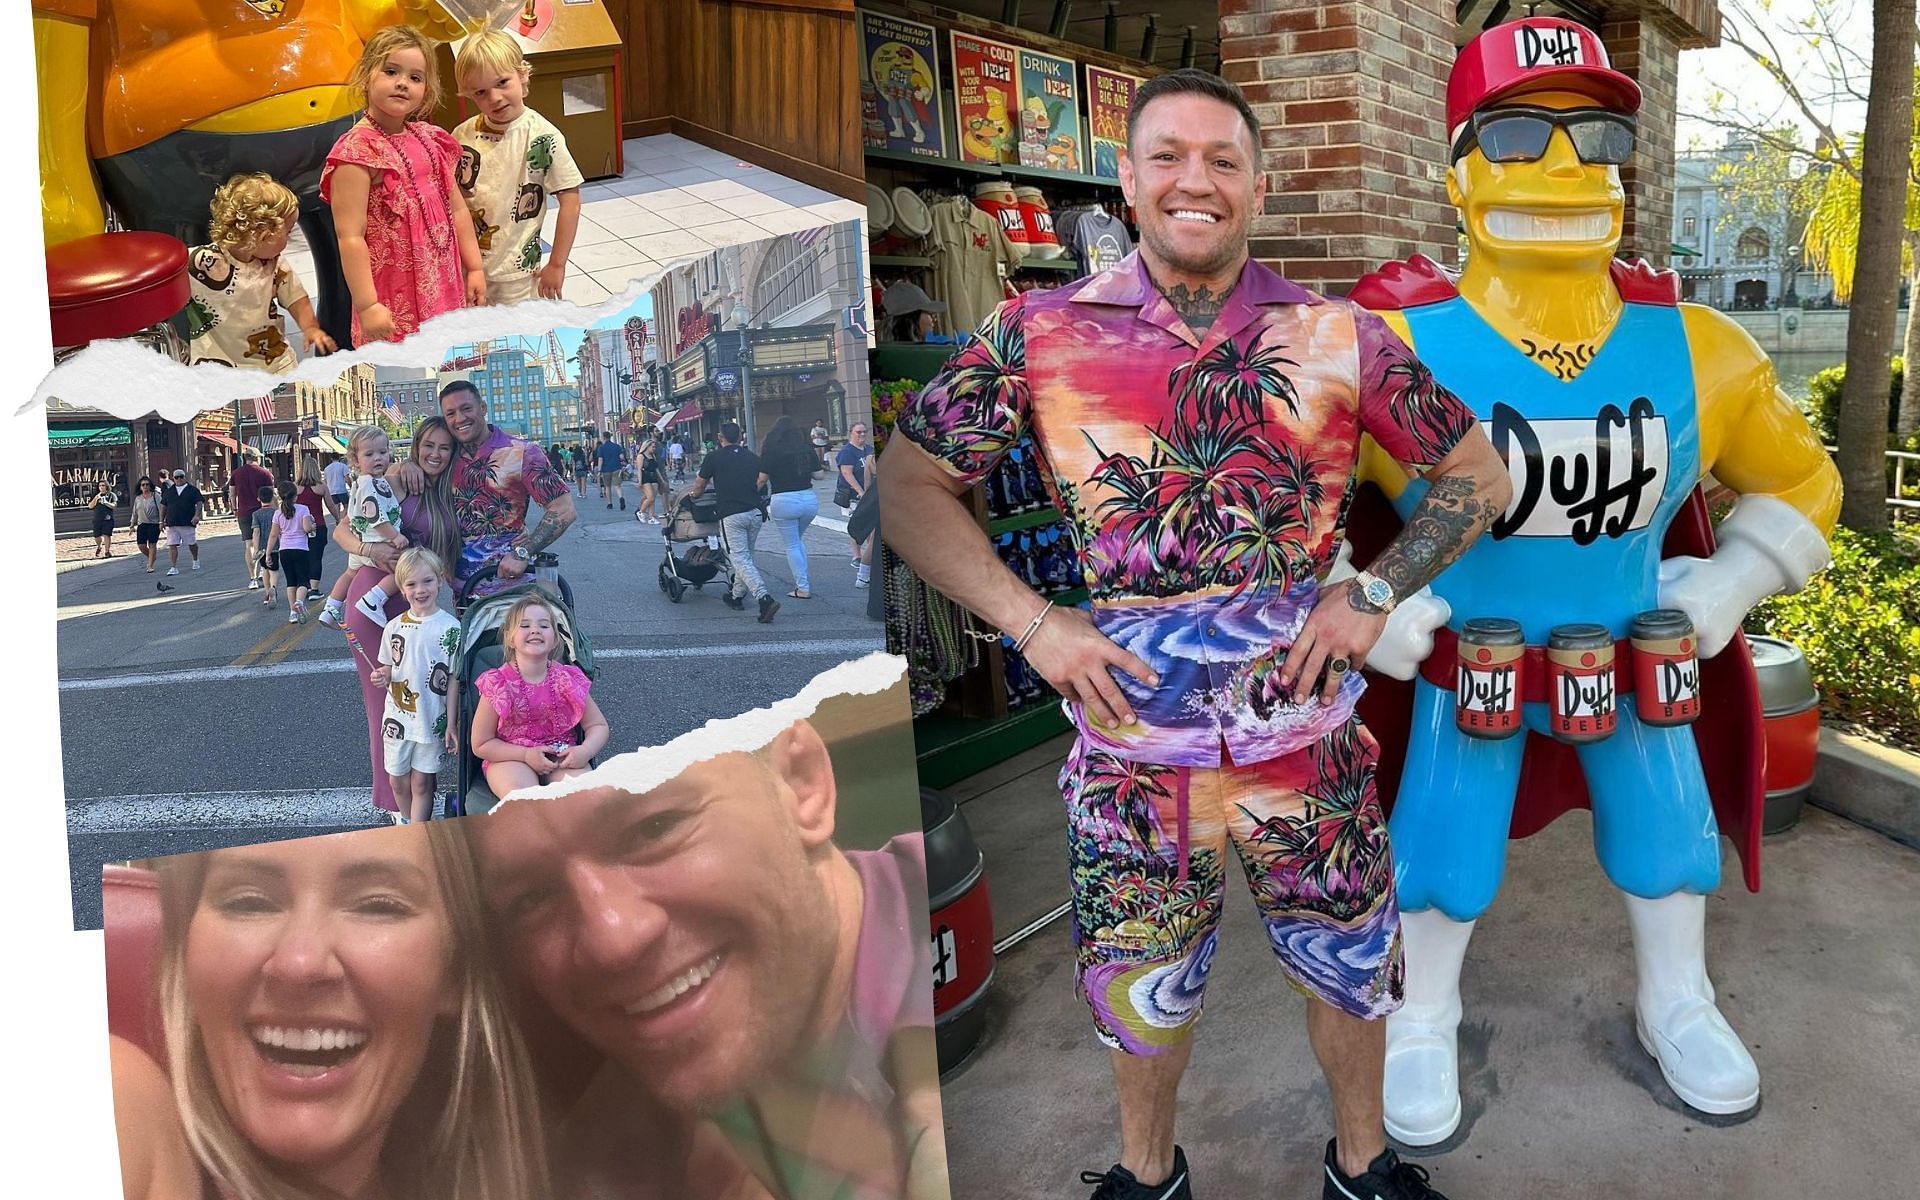 Conor McGregor hits the Duffman pose during visit to Universal Orlando Resort. [Image credits: @thenotoriousmma on Instagram]